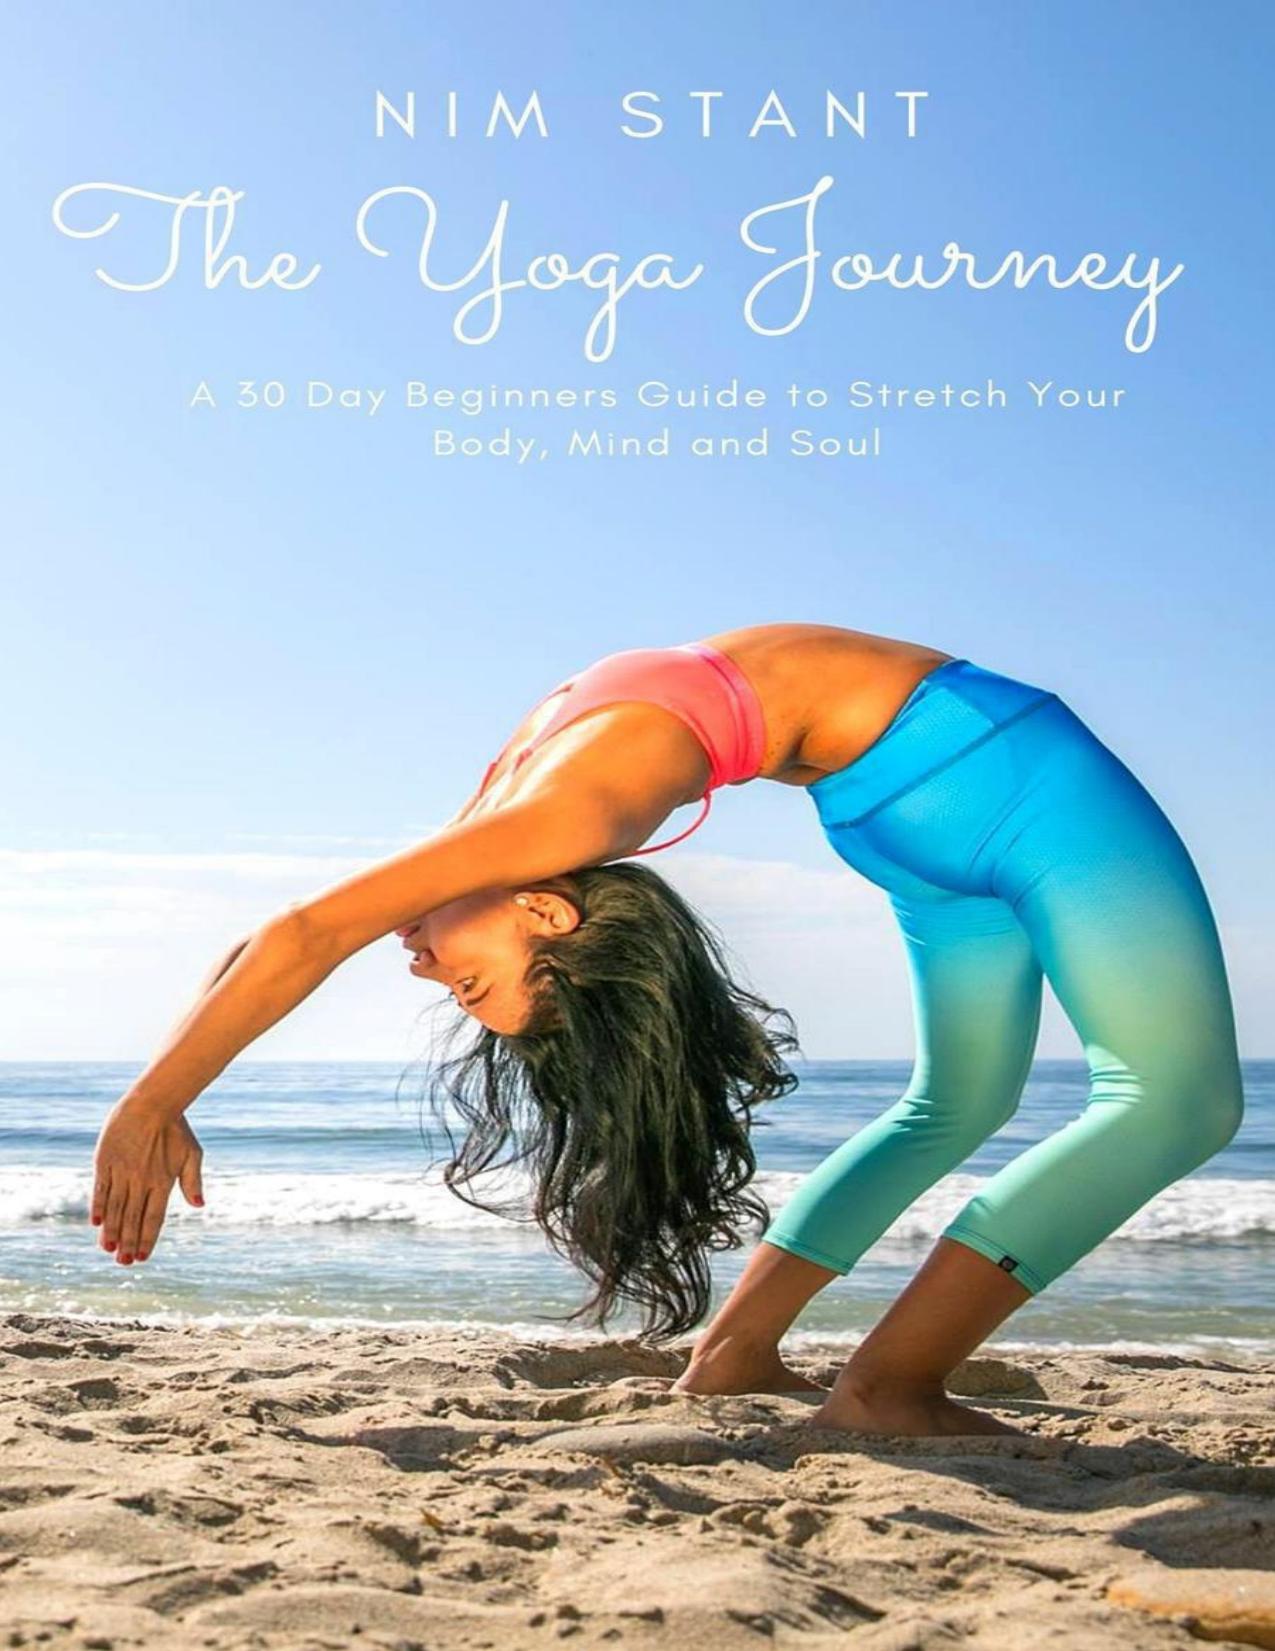 The Yoga Journey: A 30-Day Beginners Guide to Stretch Your Body, Mind, and Soul by Stant Nim